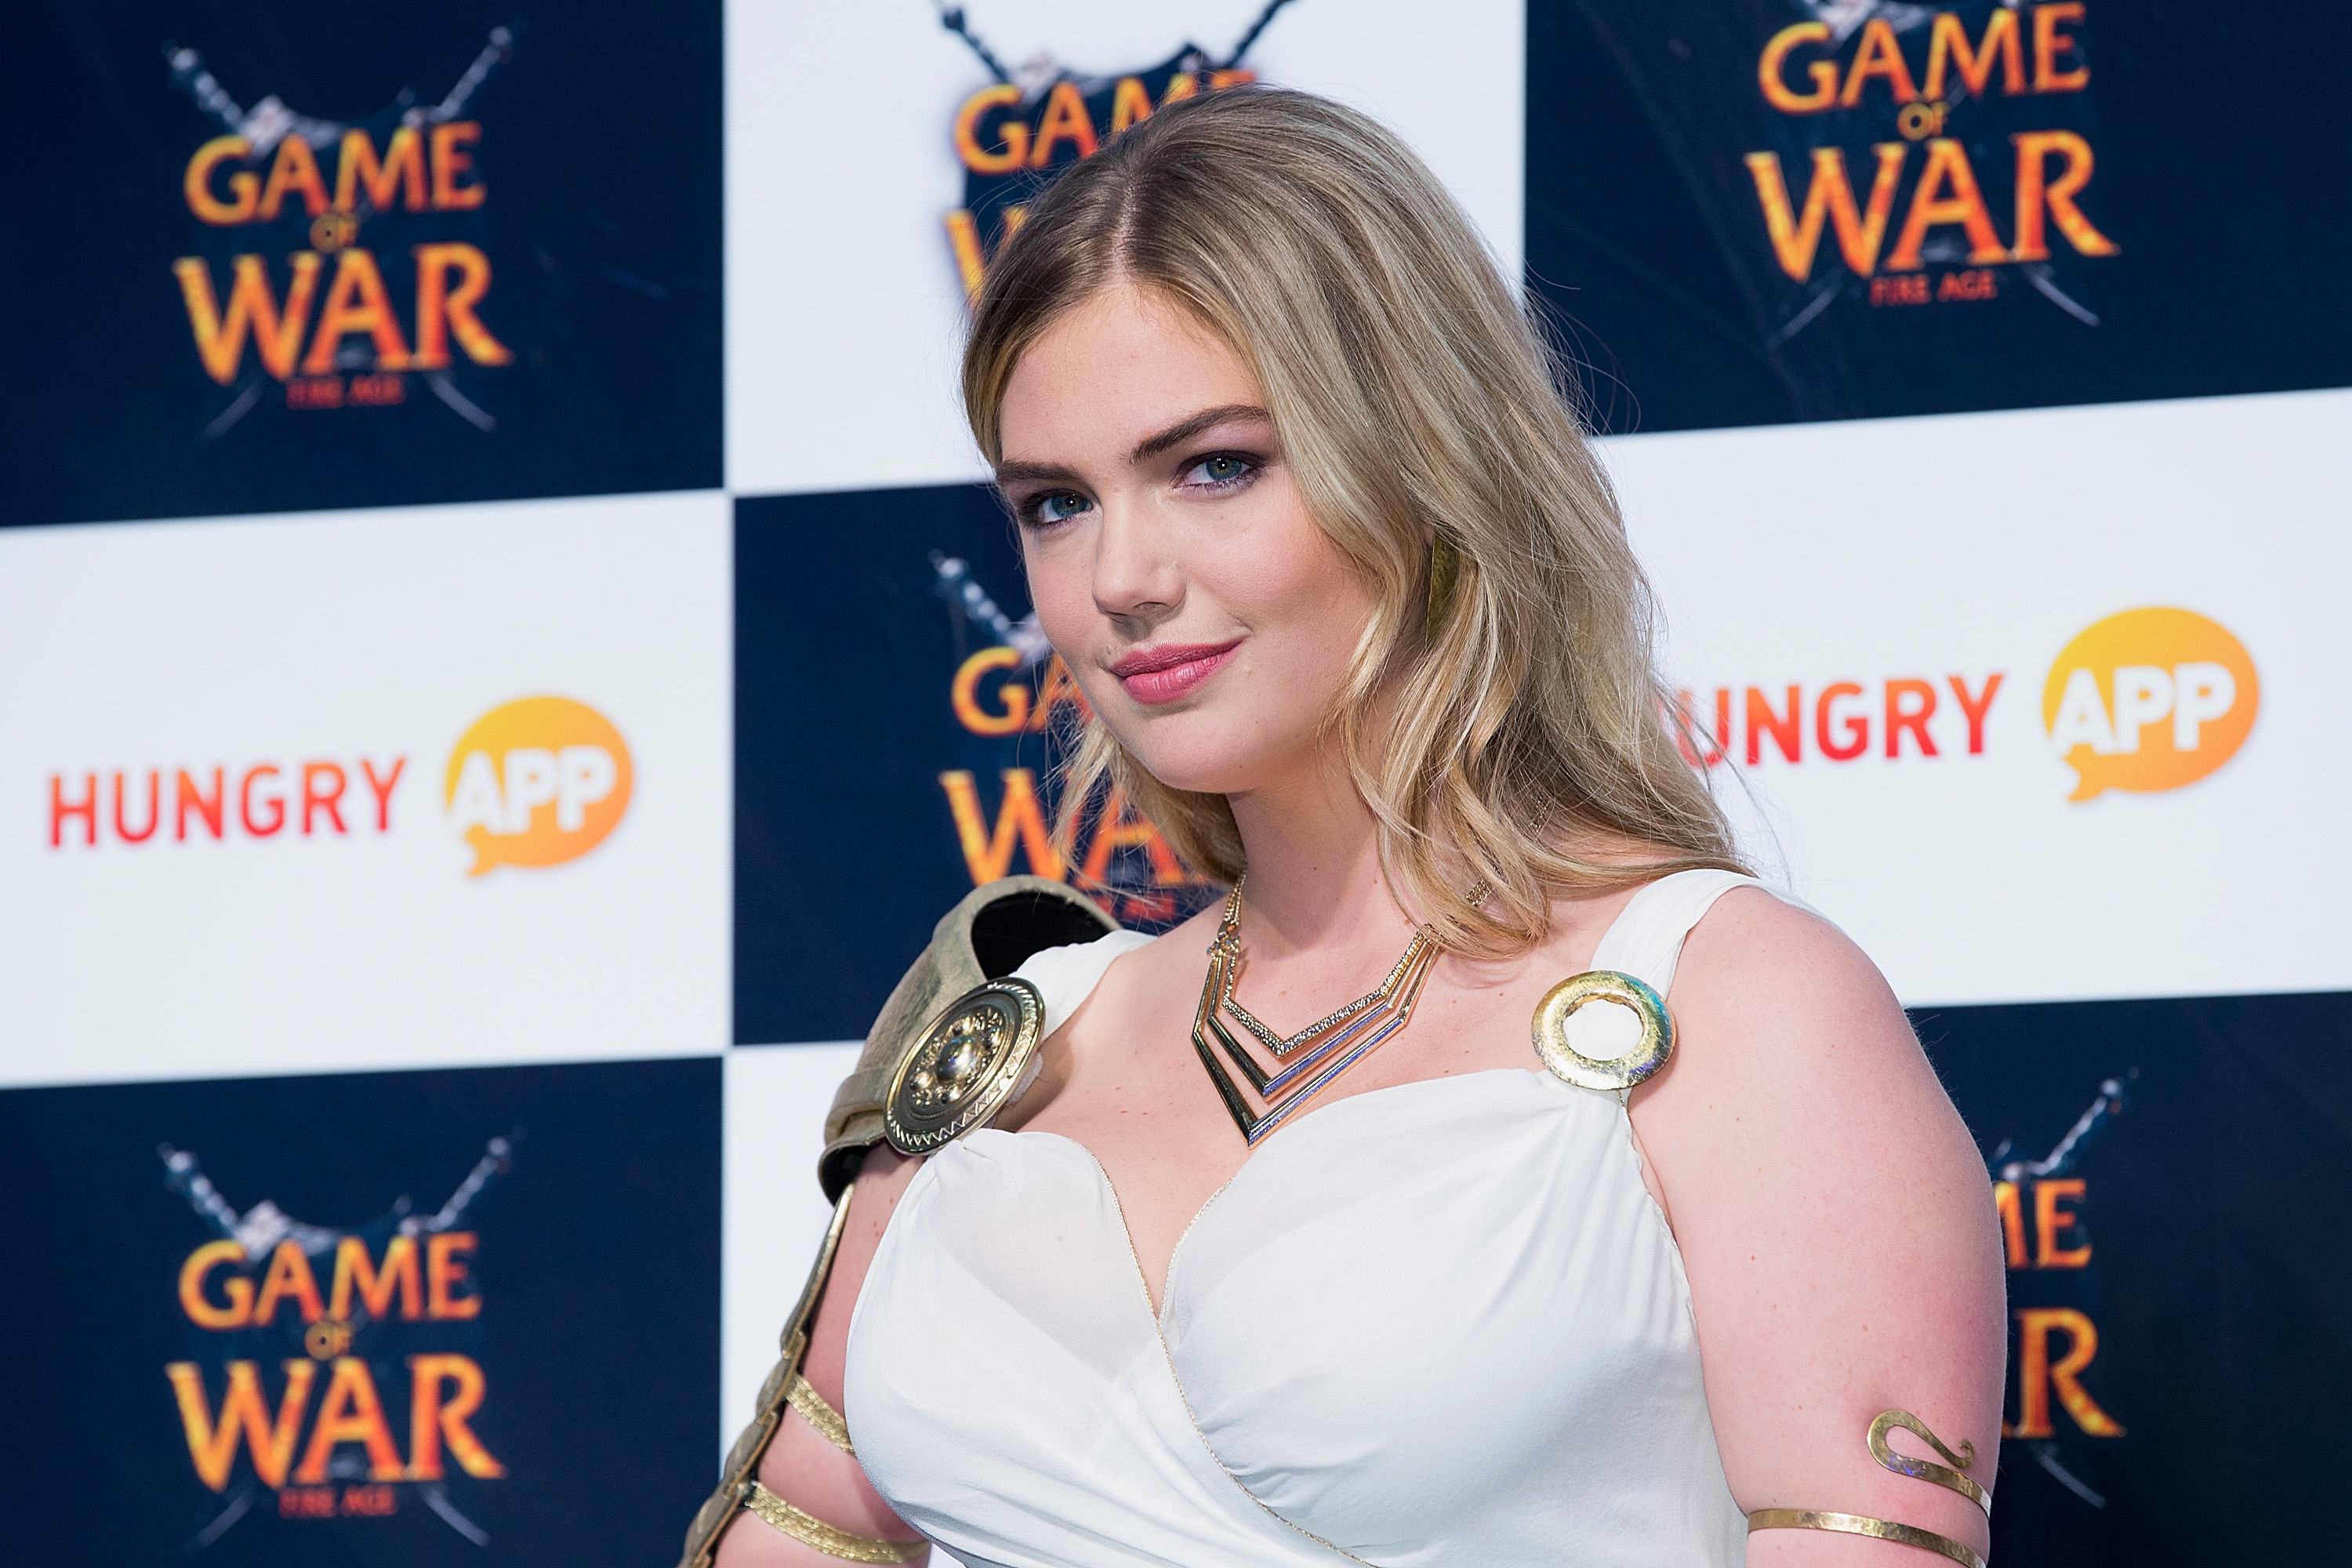 Kate Upton S Massive Game Of War Haul Fortune